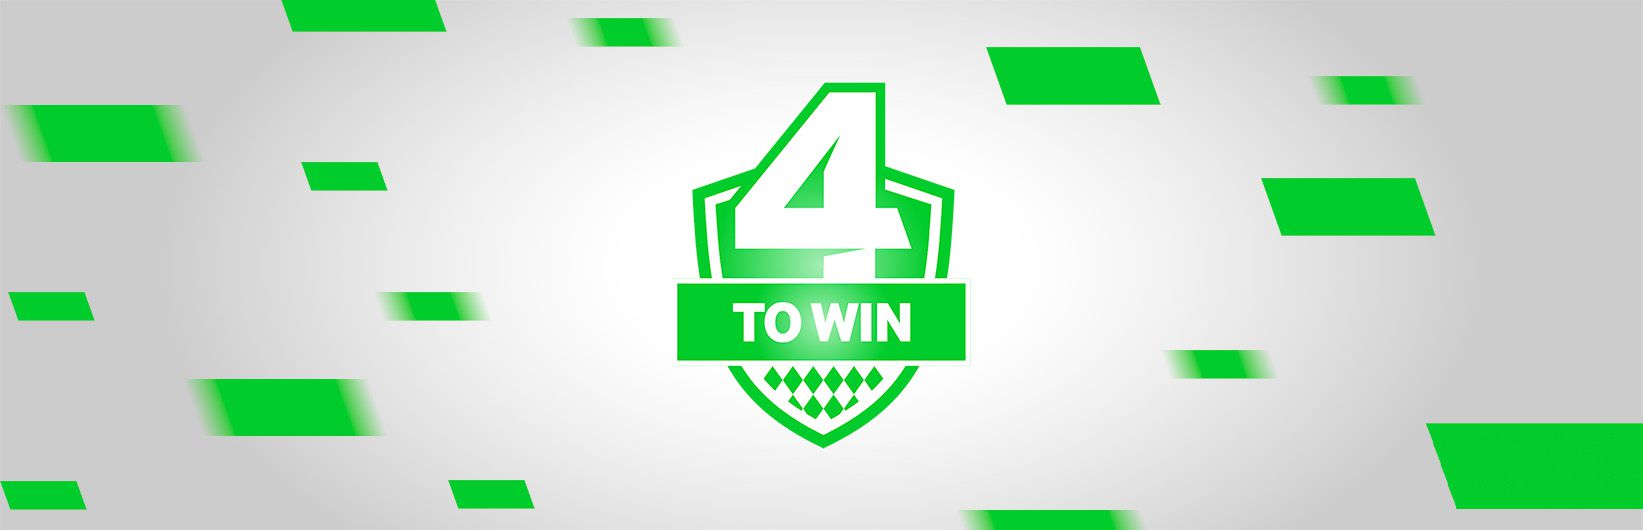 4 To Win: Betway customer wins twice in a month